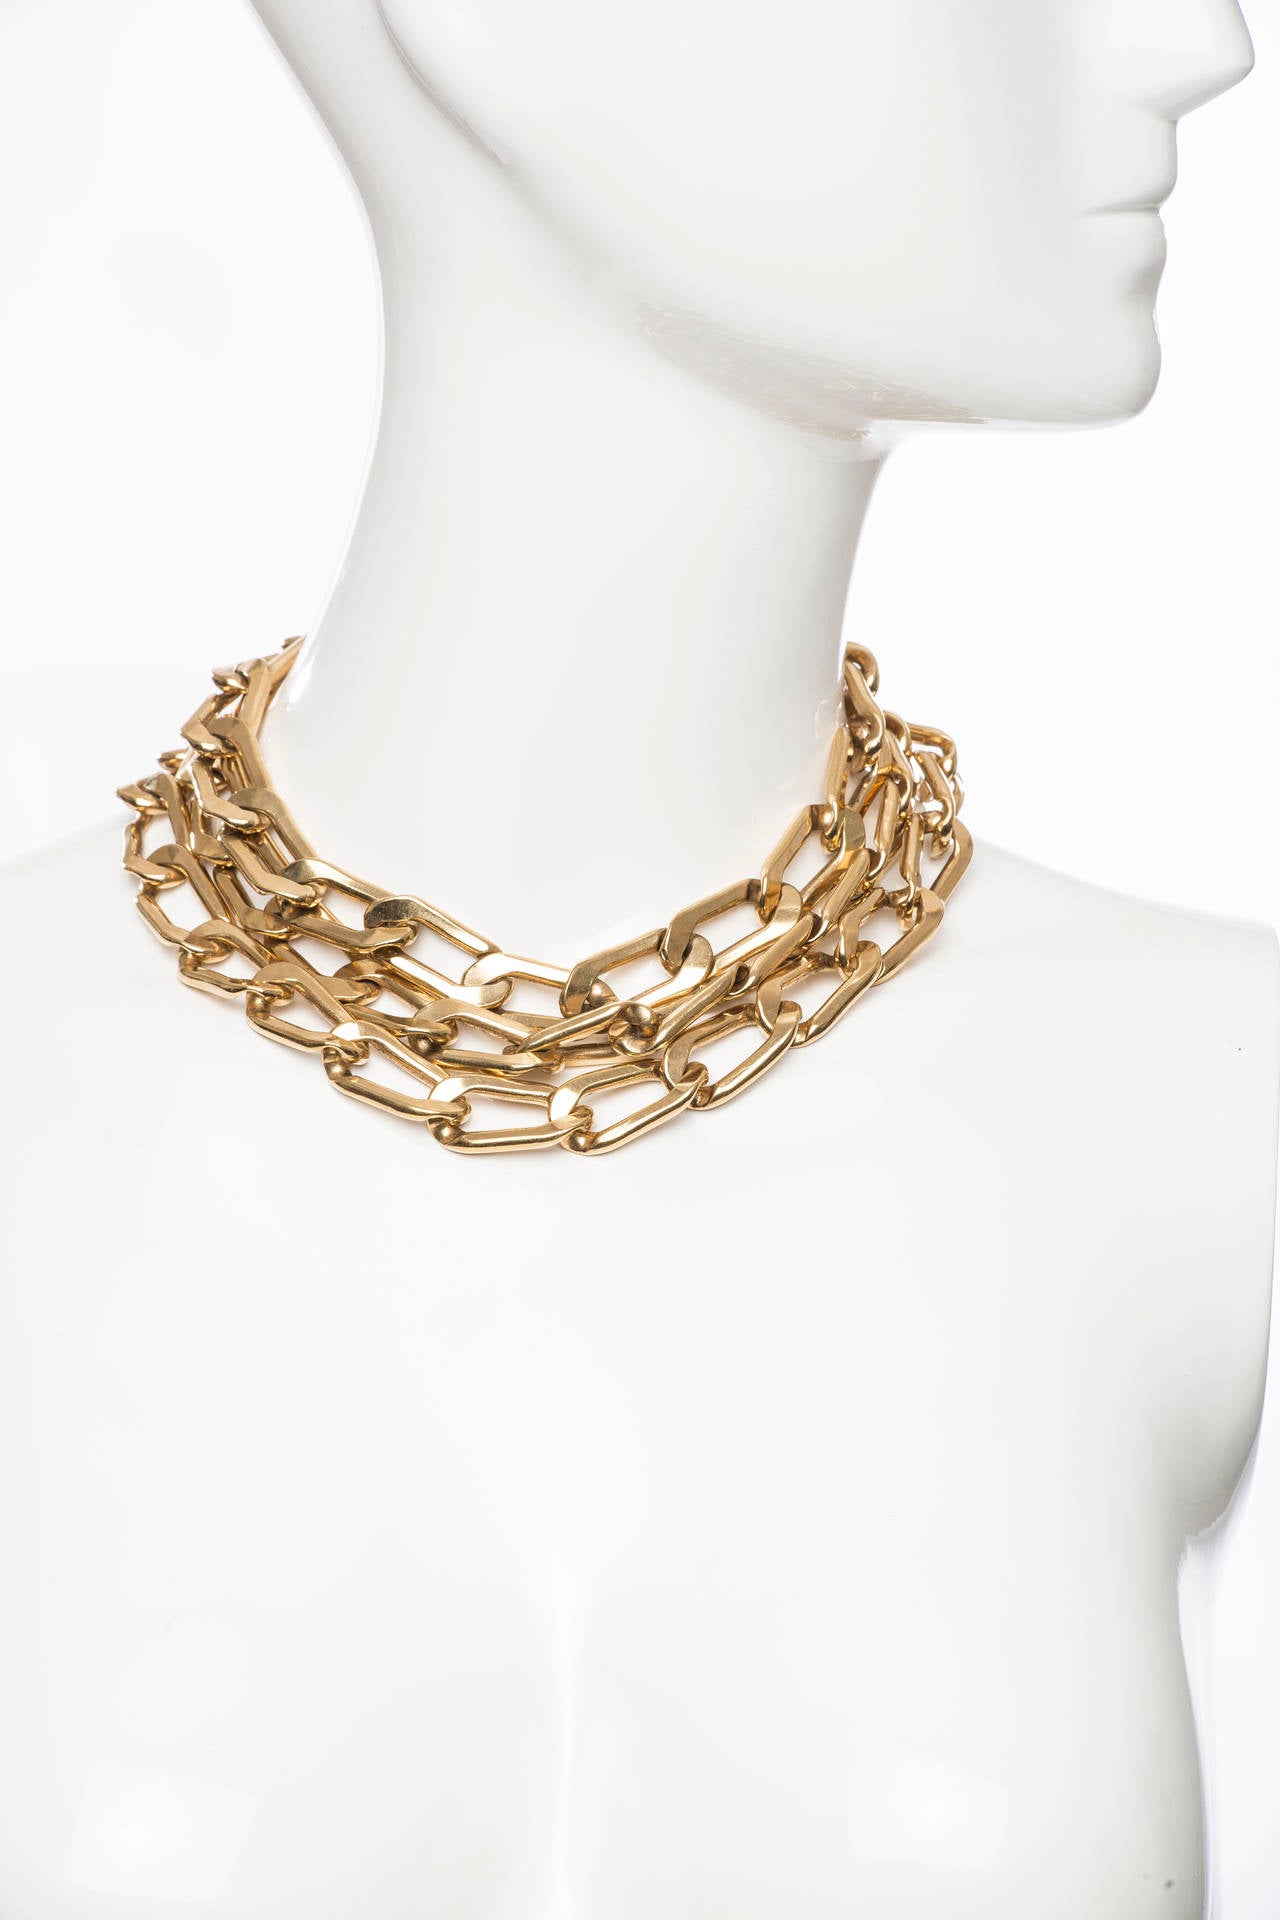 Lanvin Pre-Fall 2011gold-tone amoeba multistrand necklace with crystal embellishments and toggle lock closure. Pendant can be worn as a brooch with pin back closure. Includes box

Chain Length 18”, Ornament Width 3”, Ornament Length 3”